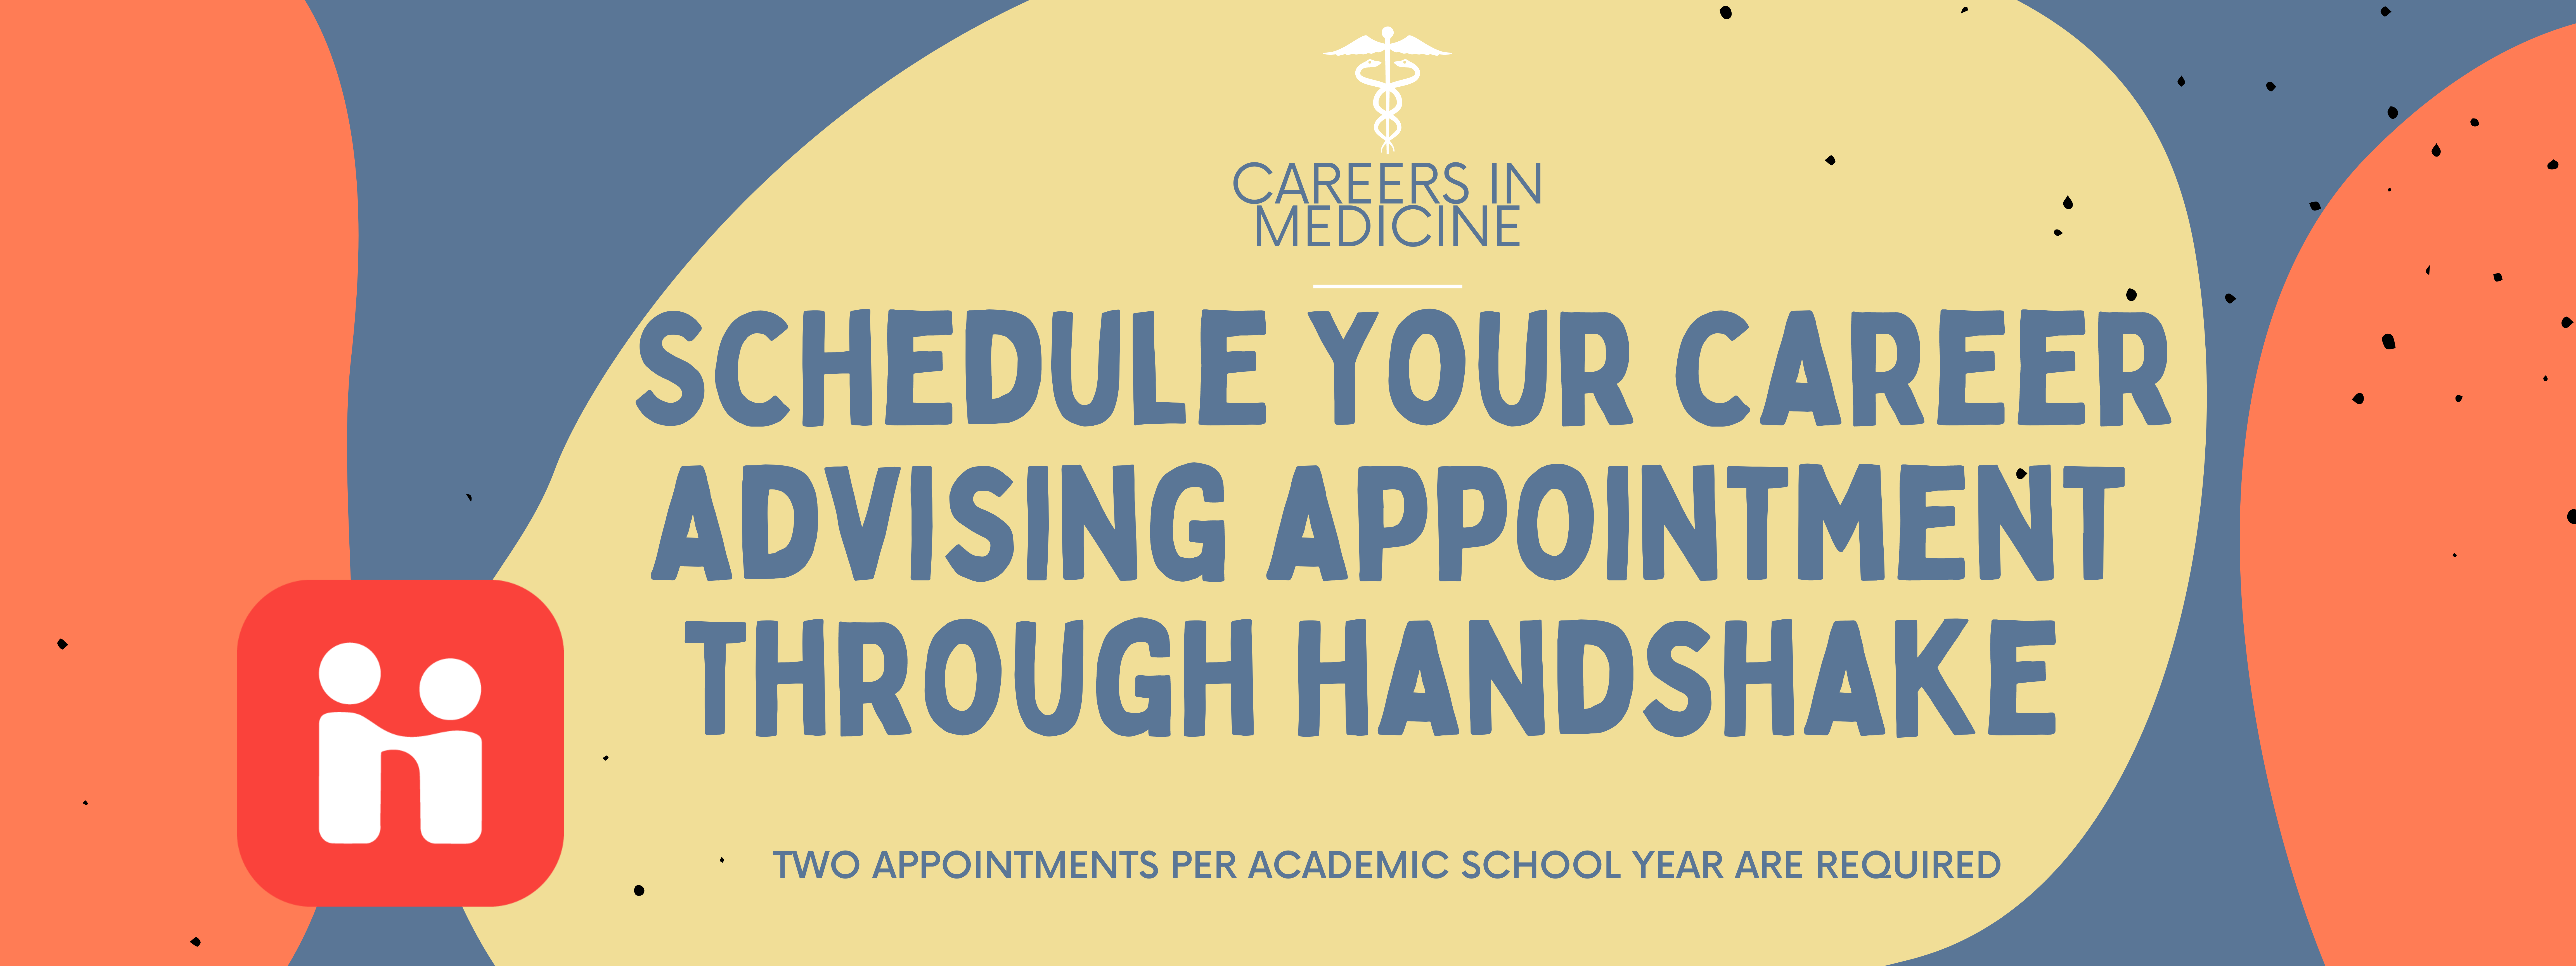 Schedule your career advising appointment through handshake Page Banner 